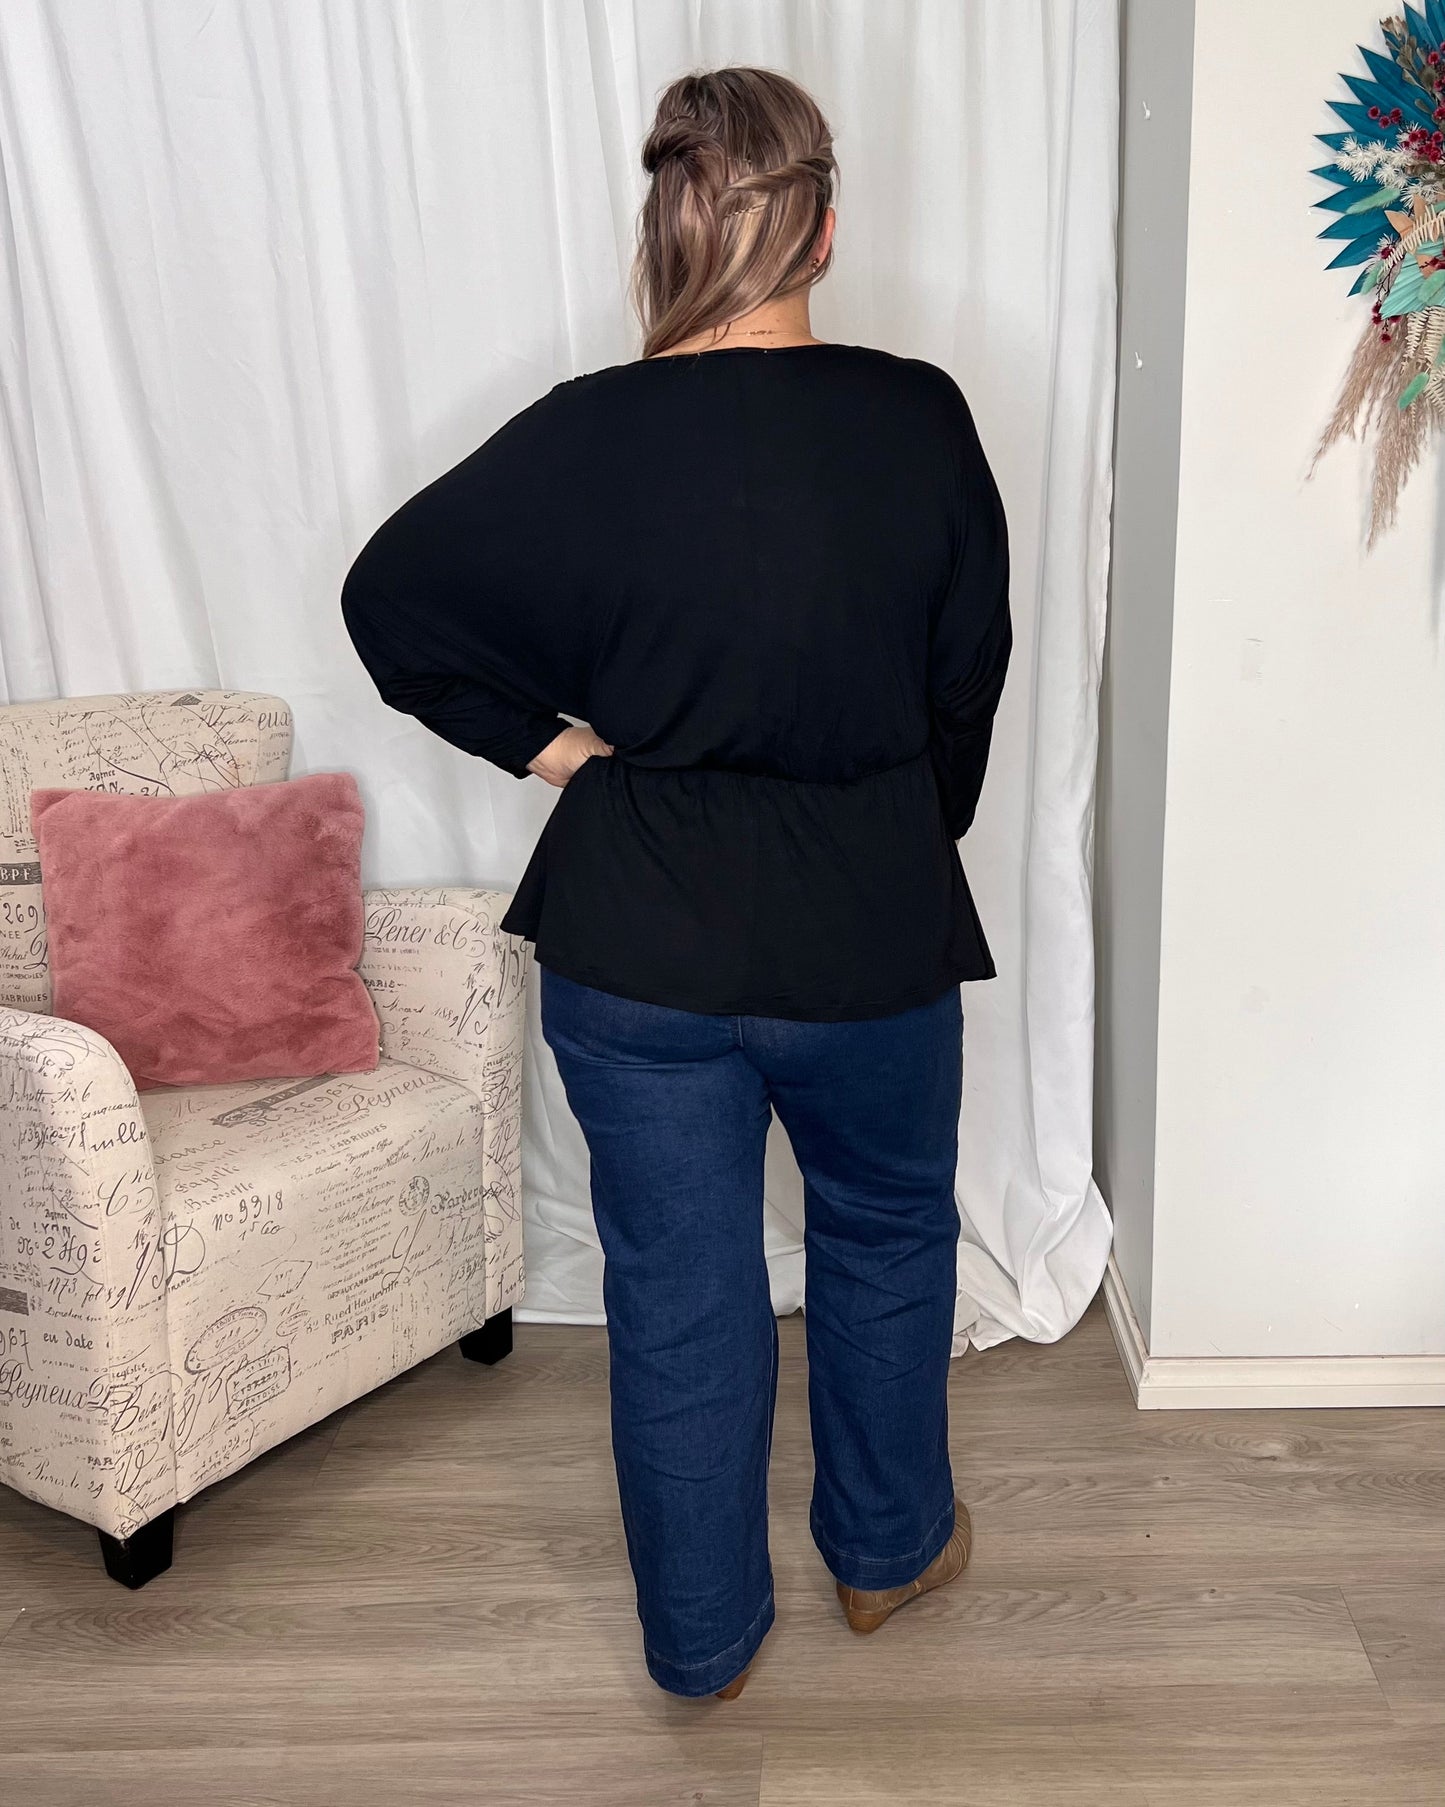 Bayeaux Wrap Top - Black | Betty Basics | The Bayeaux Top combines a classic shape with a comfortable fit, making this the go to when pairing with your fave bottoms
Features:

Faux wrap (breastfeeding friend